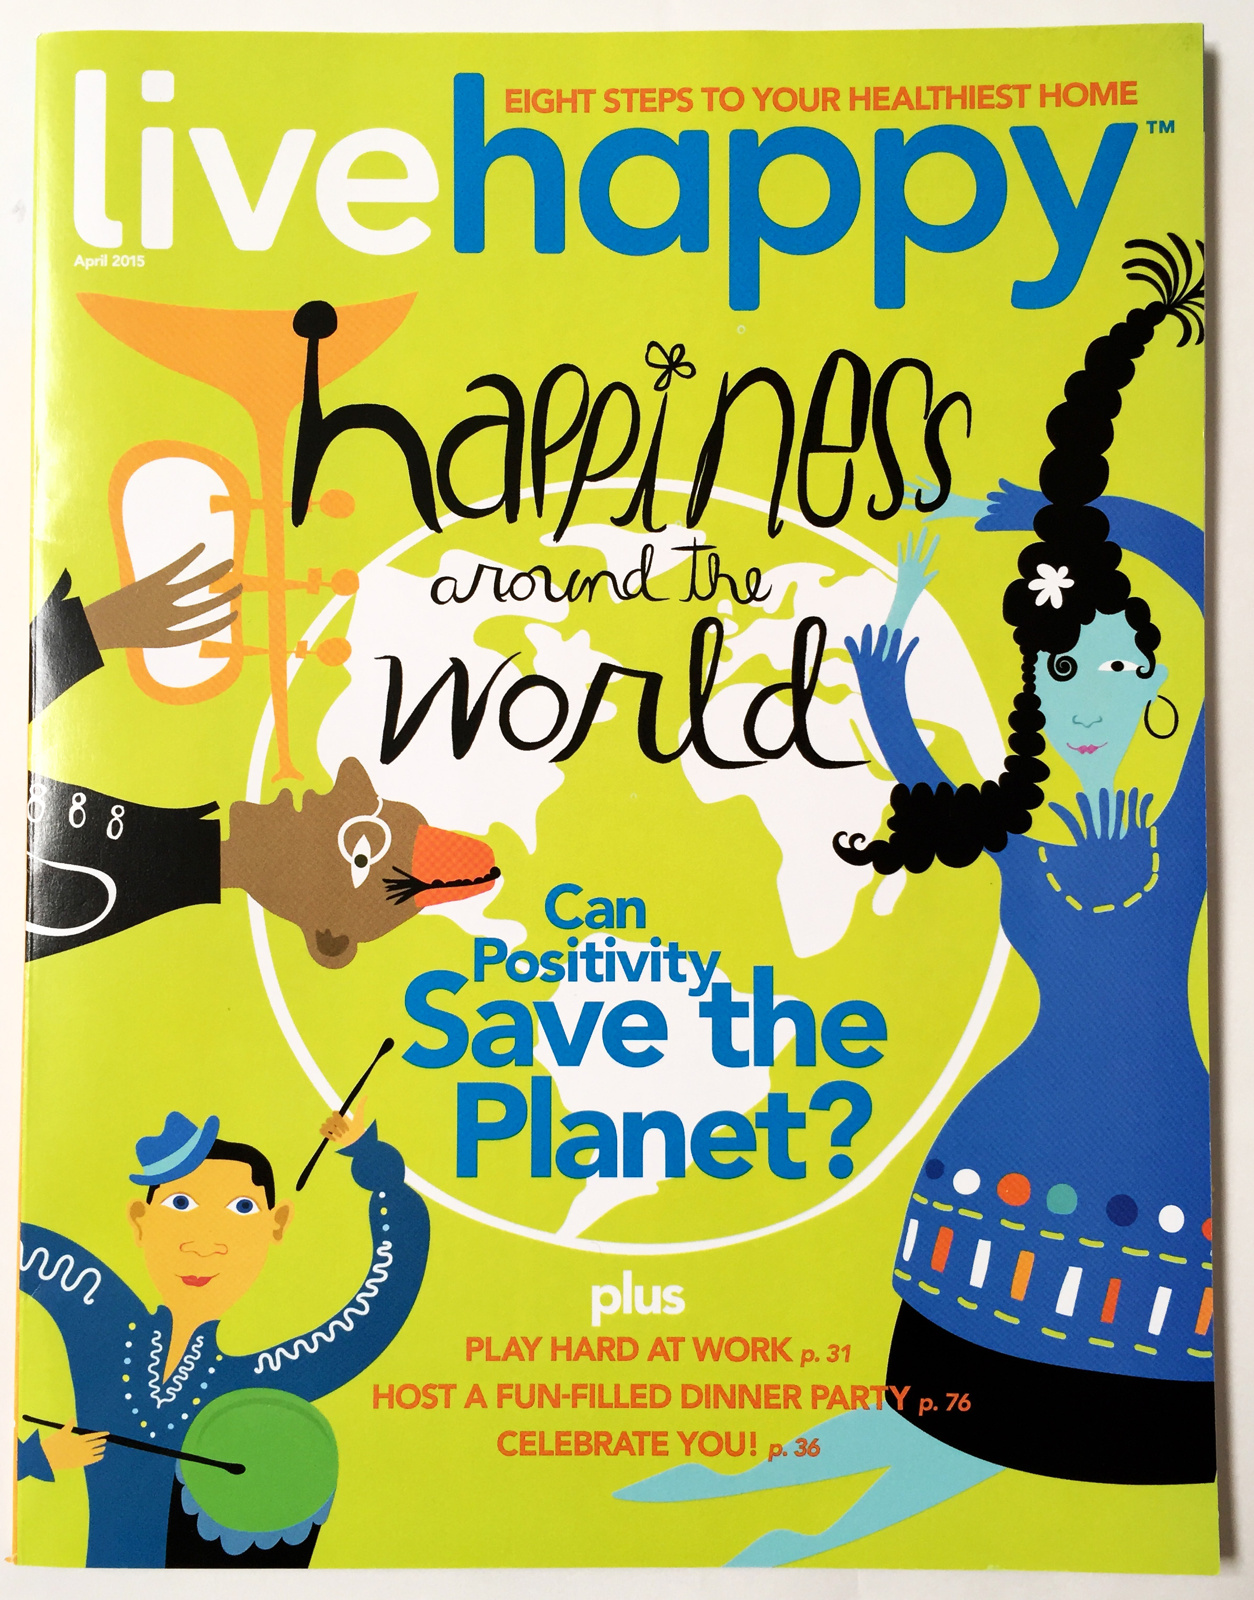 New April 2015 cover